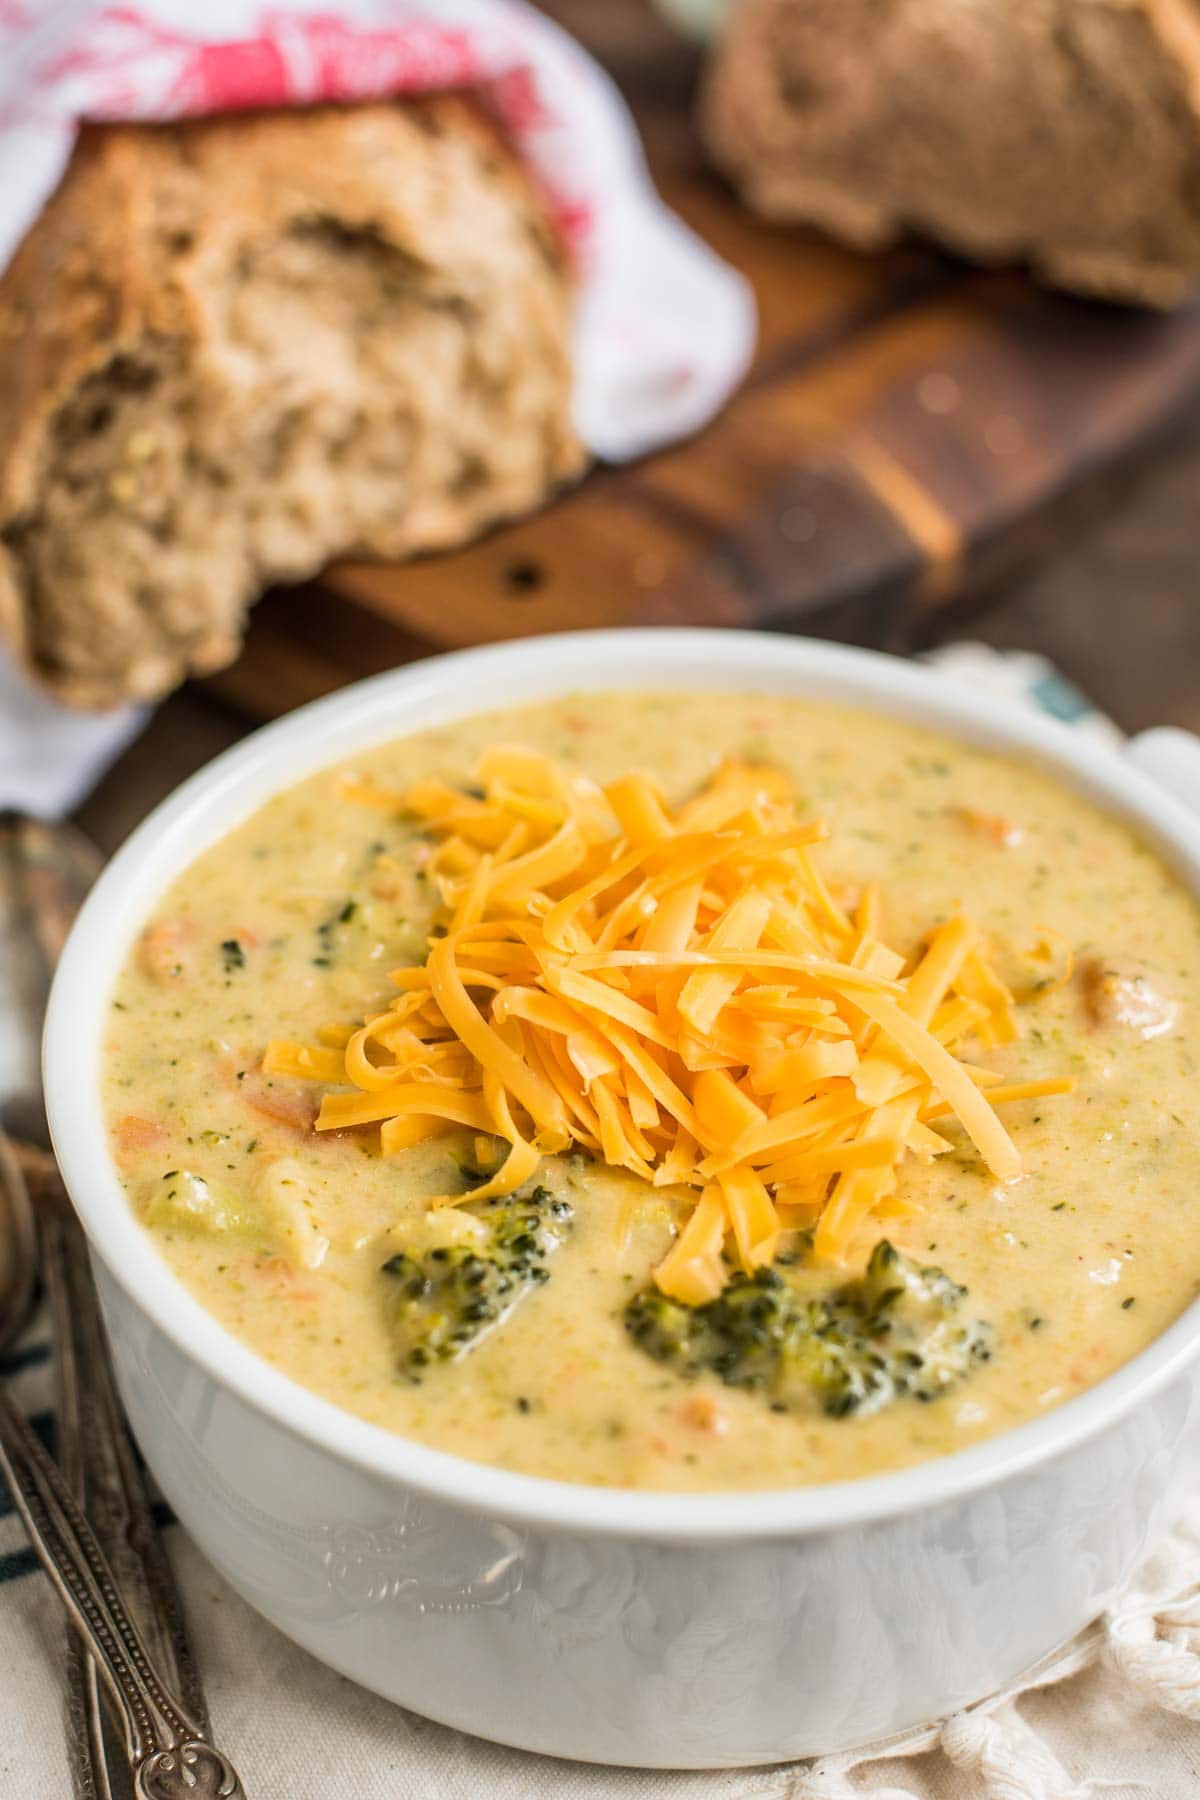 This classic Broccoli Cheddar Soup is going to be your go-to recipe!